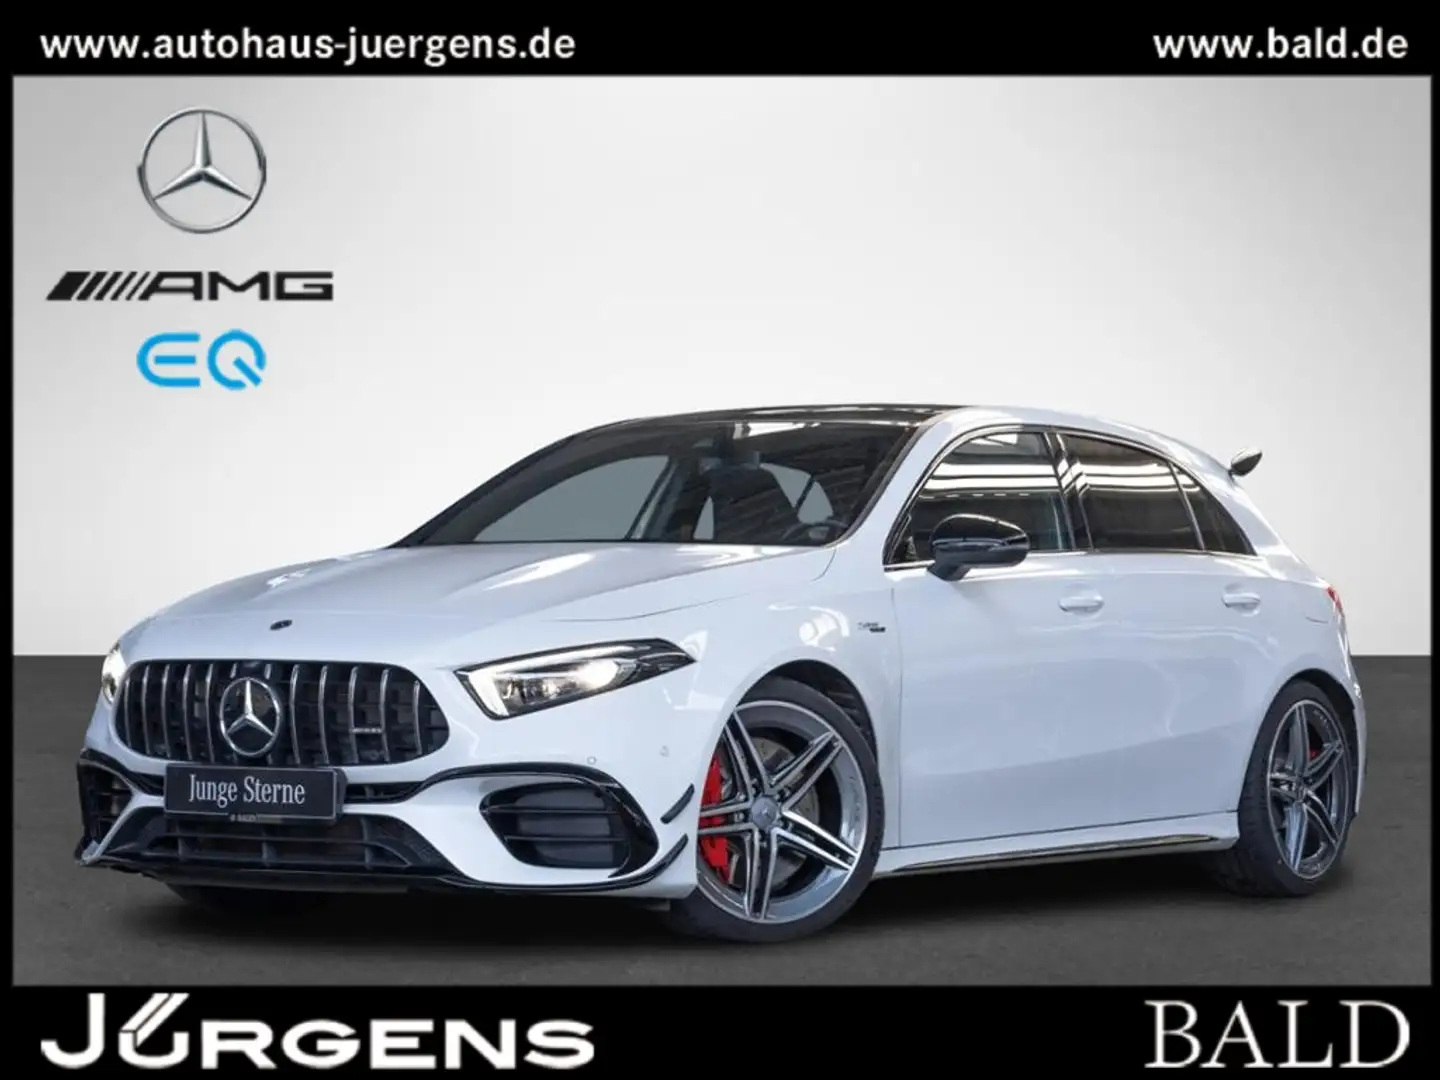 Mercedes-Benz A 45 AMG A 45 S AMG 4M+ Aero/Wide/ILS/Pano/Cam/Night/19" White - 2